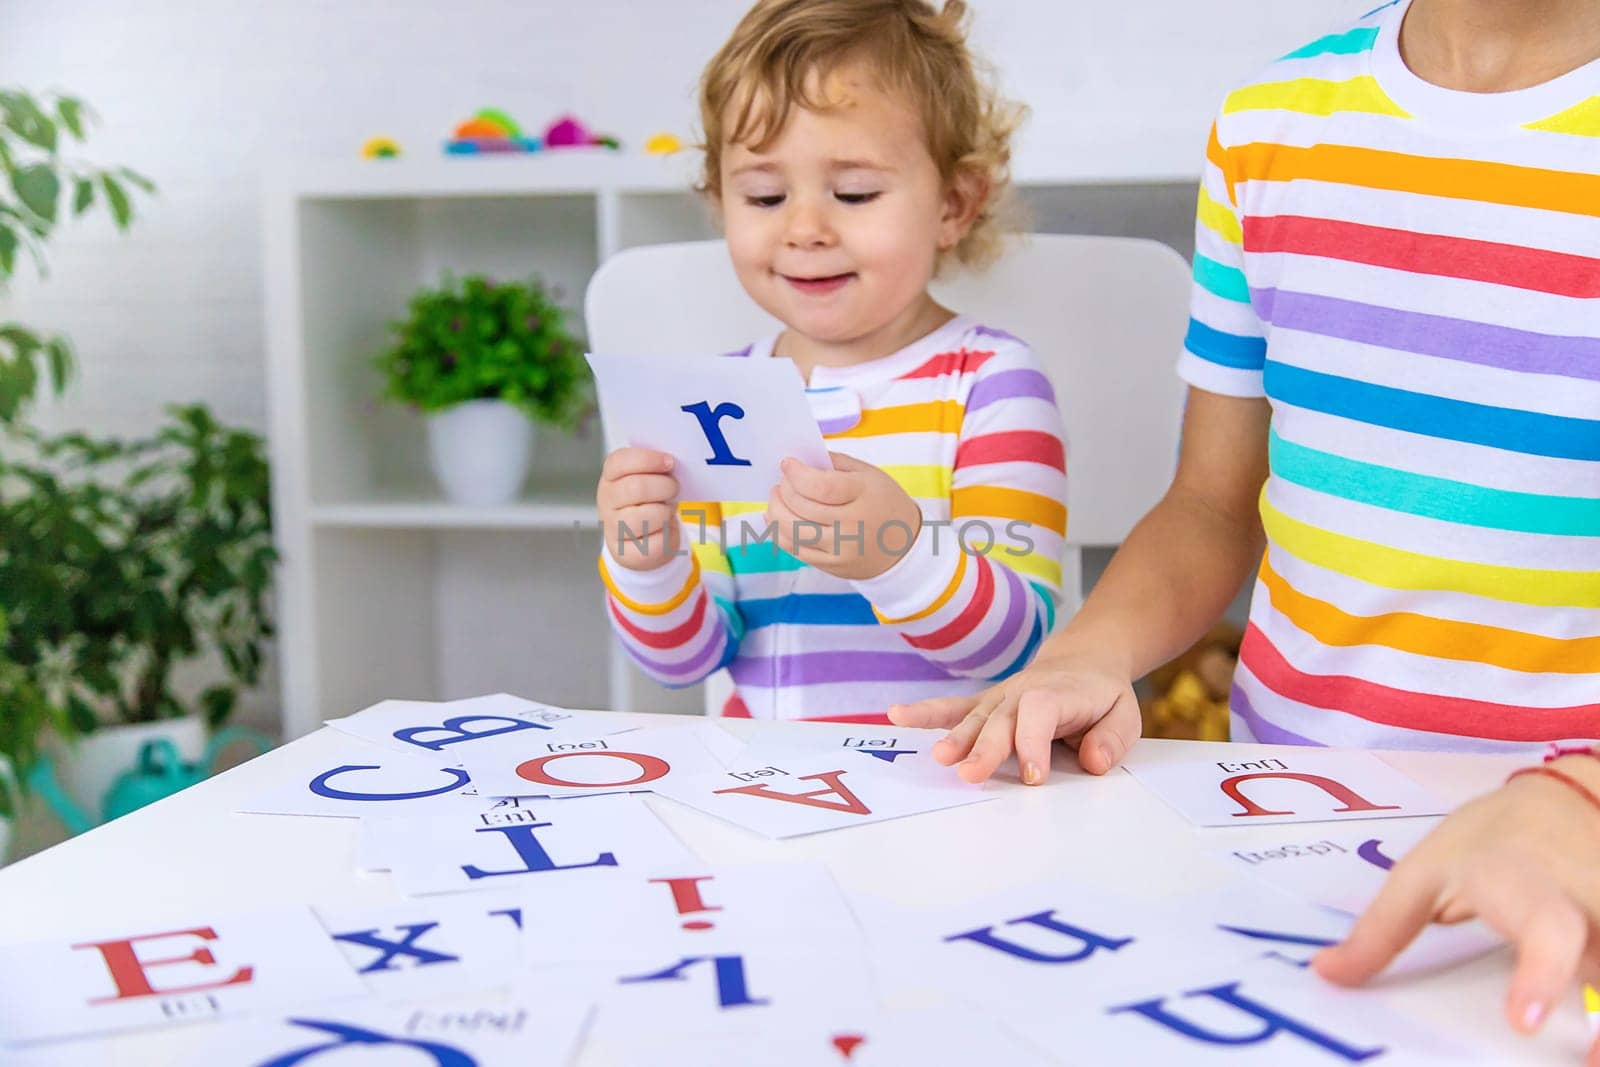 The child learns English letters. Selective focus. Kid.